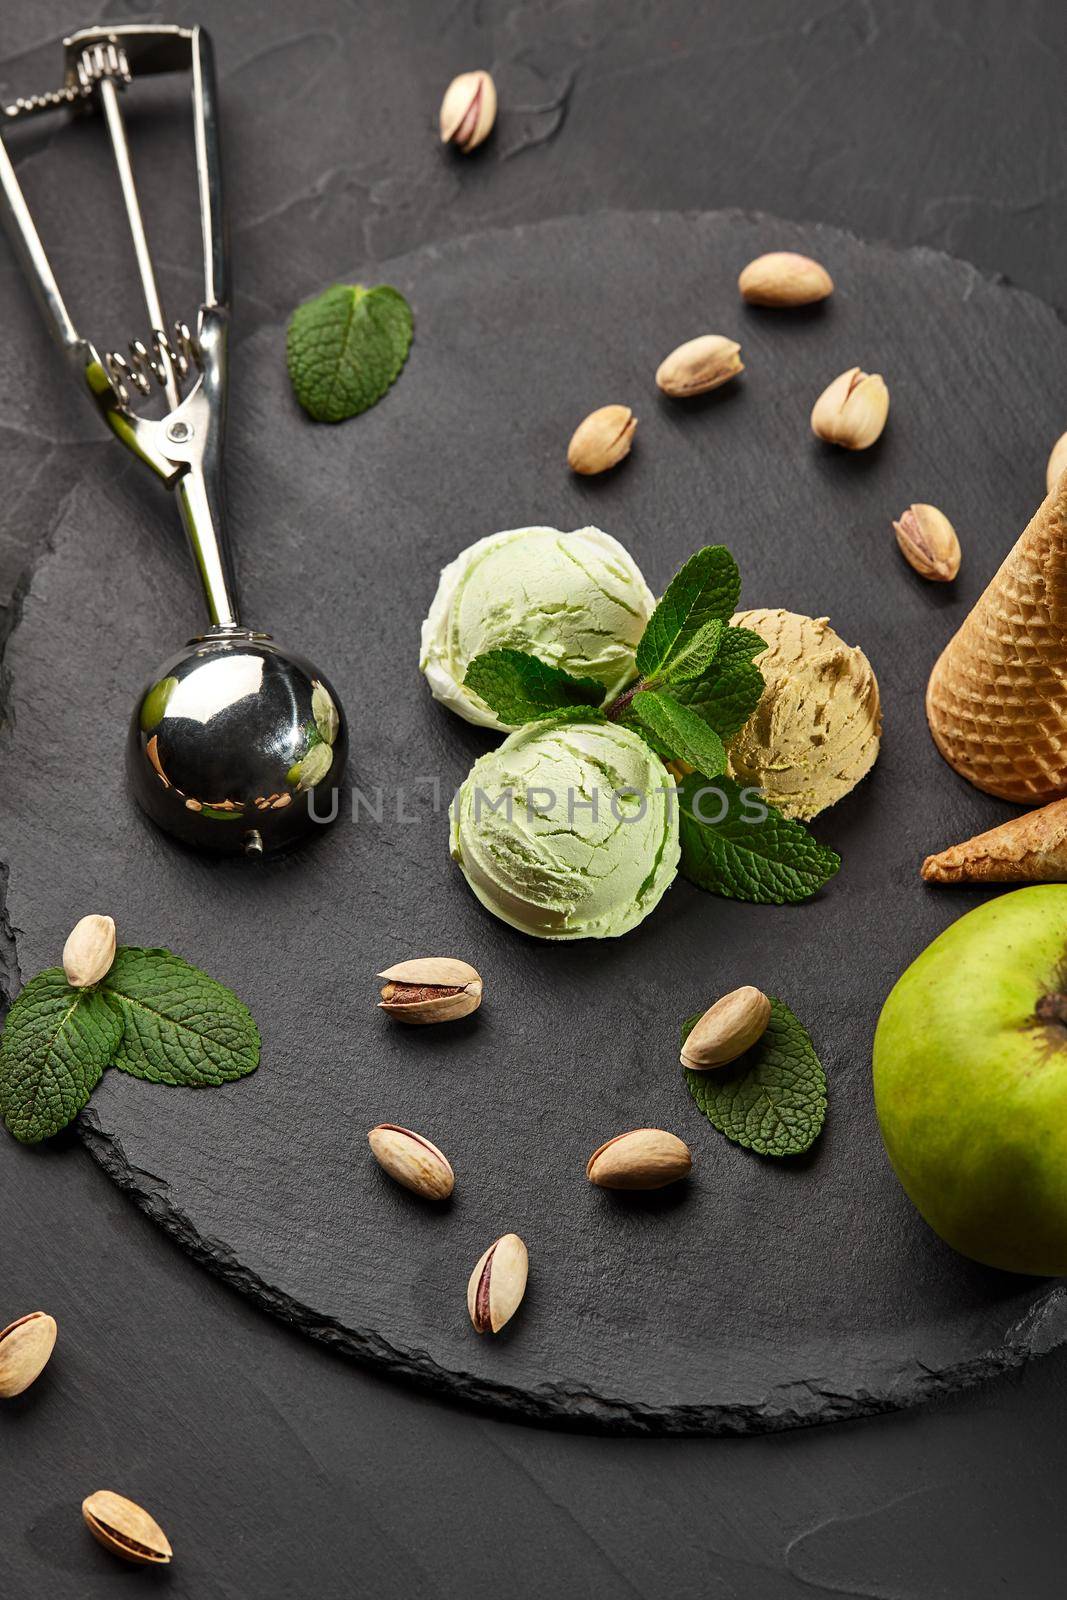 Delicious pistachio and chocolate ice cream decorated with fresh mint and served on a stone slate over a black background. by nazarovsergey